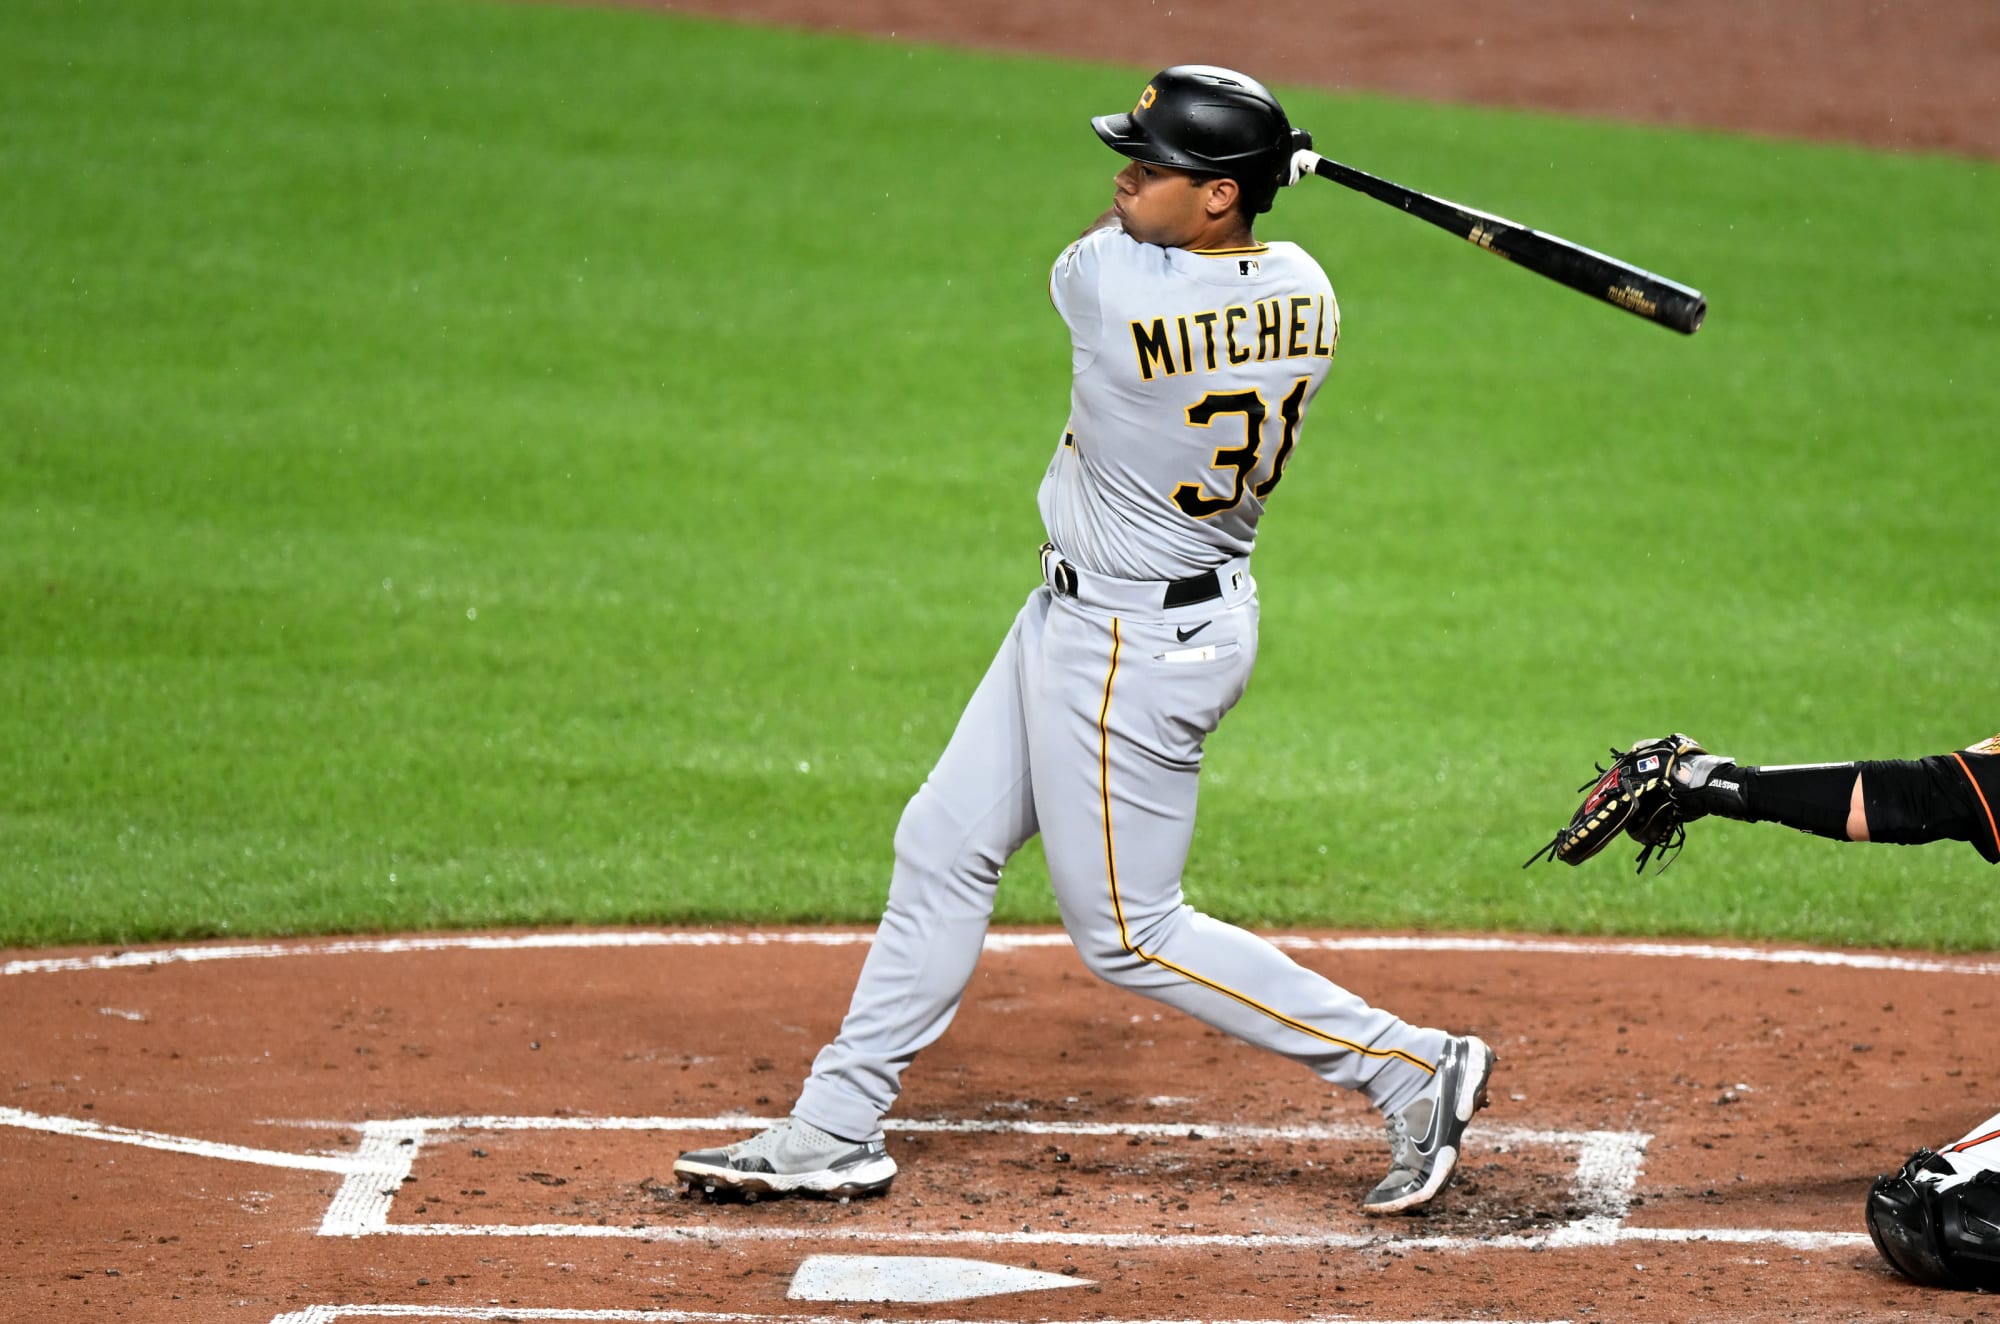 pittsburgh-pirates-2022-season-in-review-outfielder-cal-mitchell-bvm